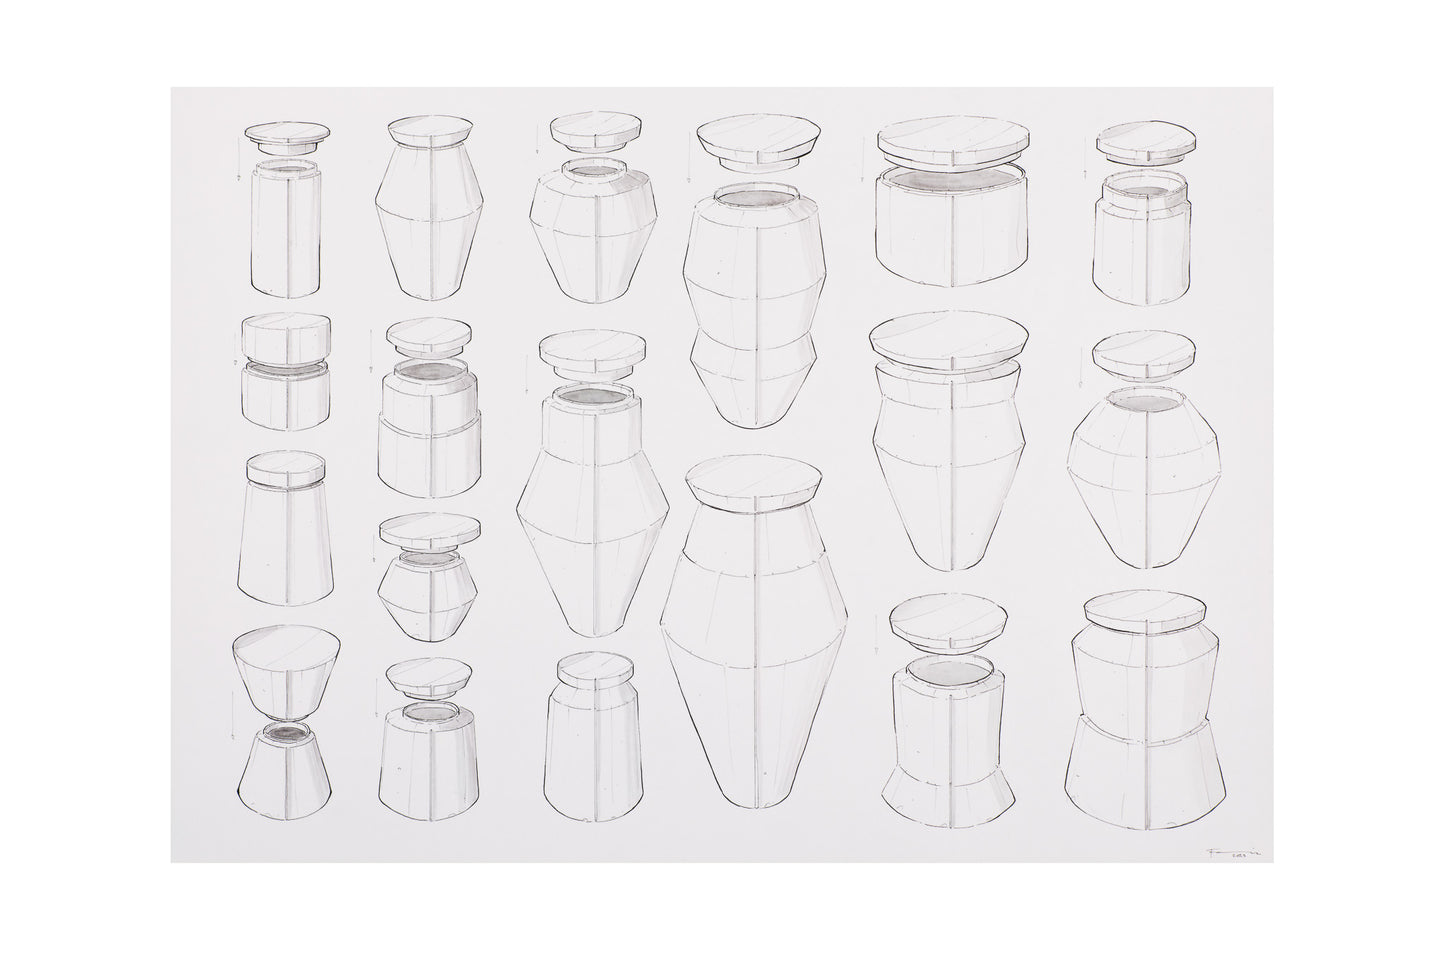 Florian Gadsby: Urns, Lids and Lines Original Drawing